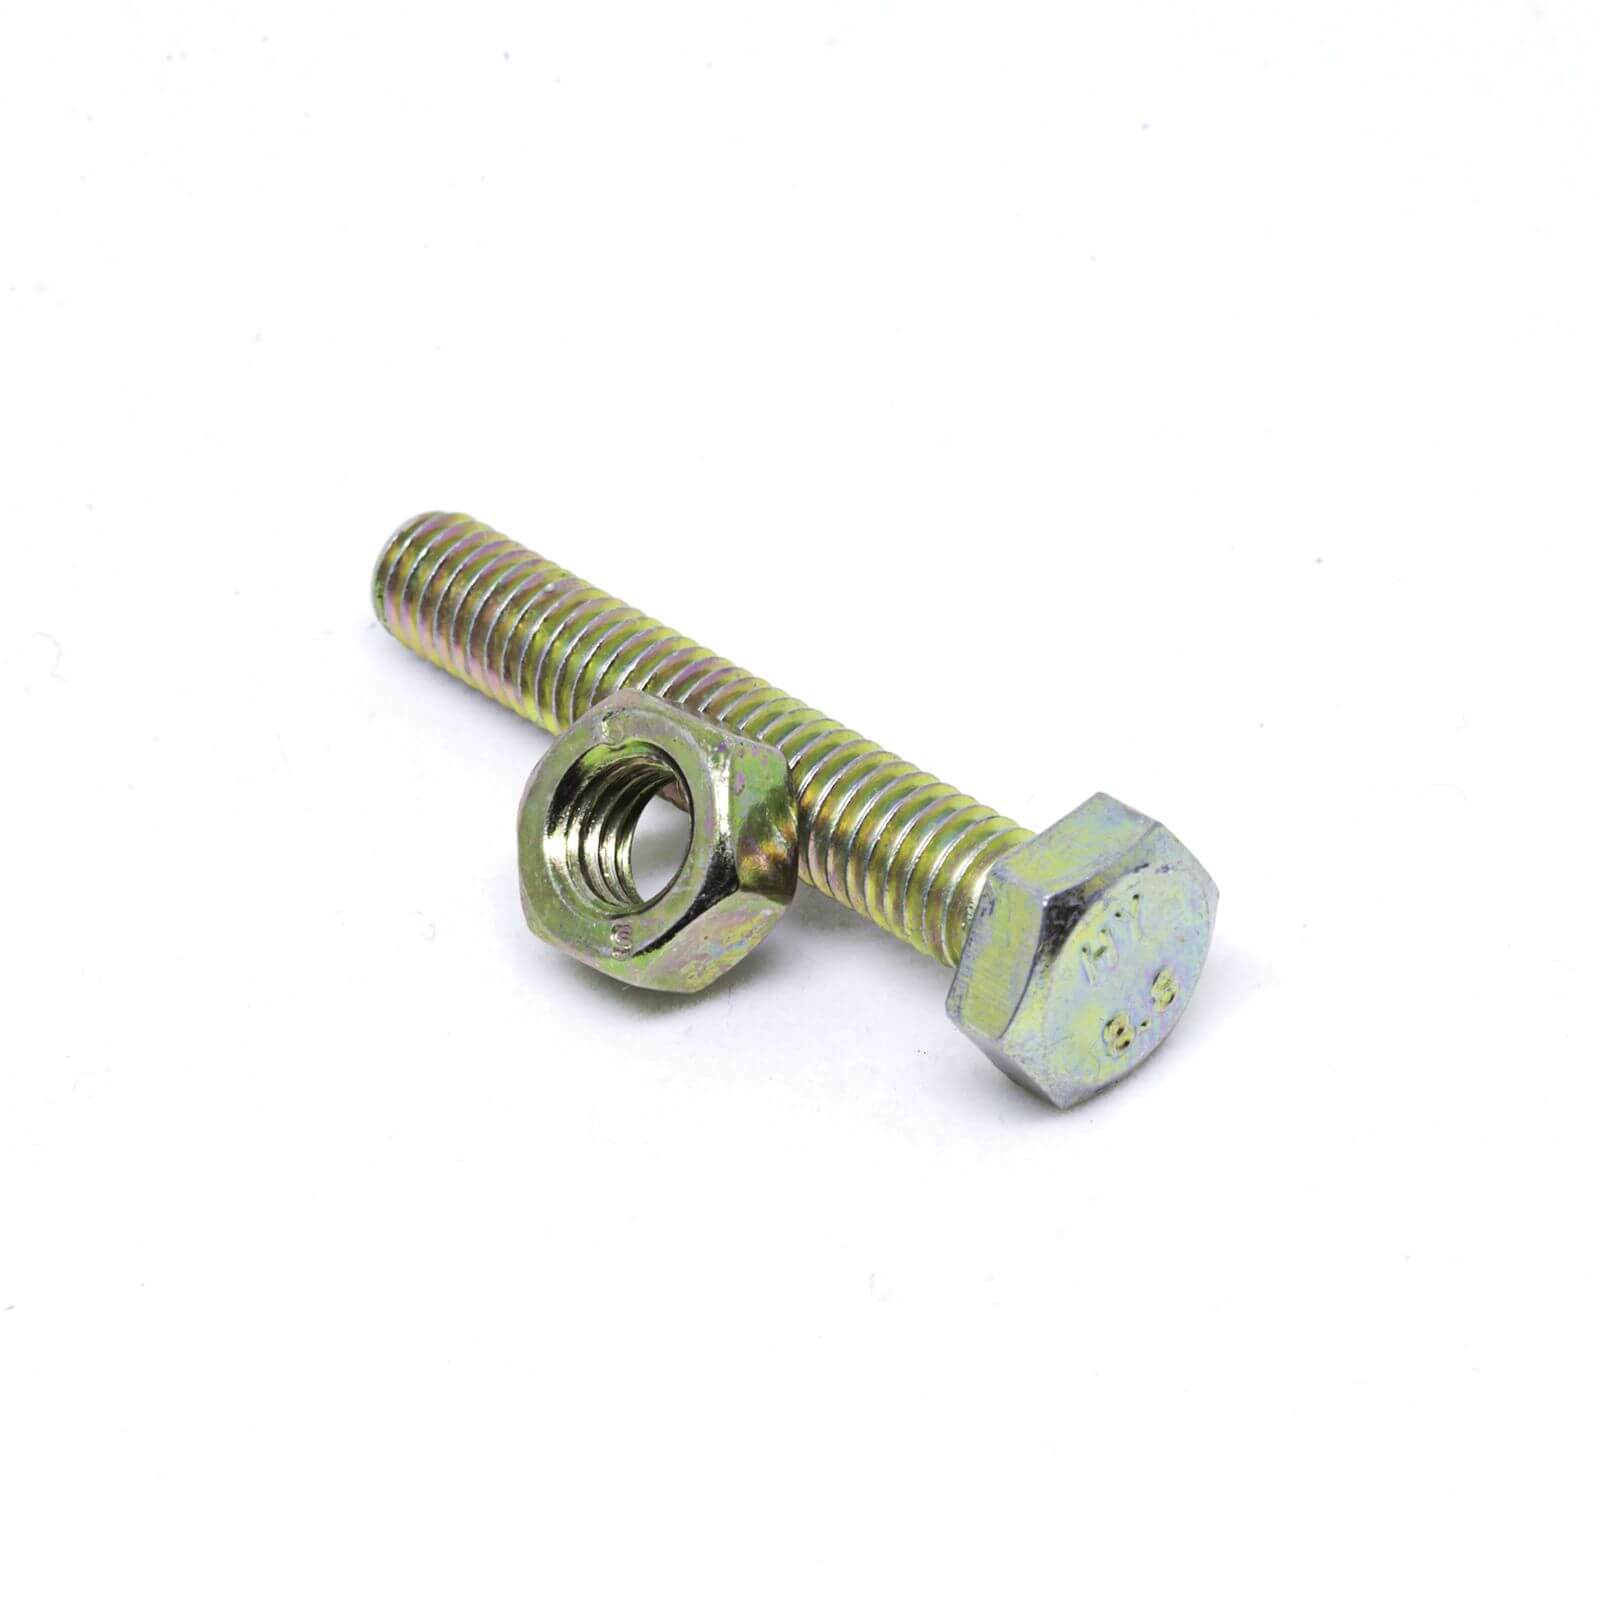 Pinnacle High Tensile Bolts and Nuts - 8 x 50mm - 4 Pack